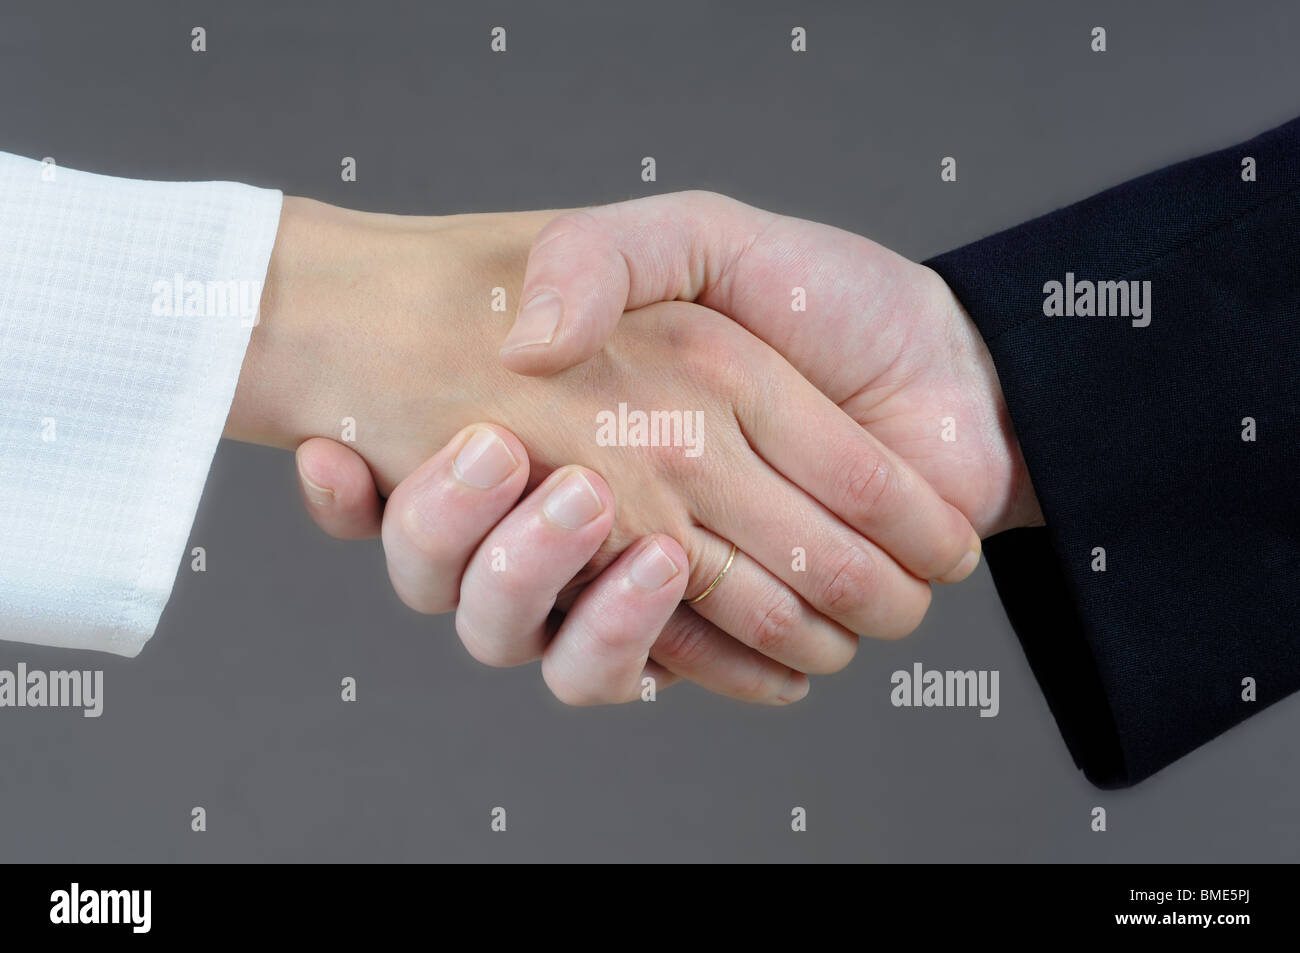 Handshake concept - male and female hand. Stock Photo